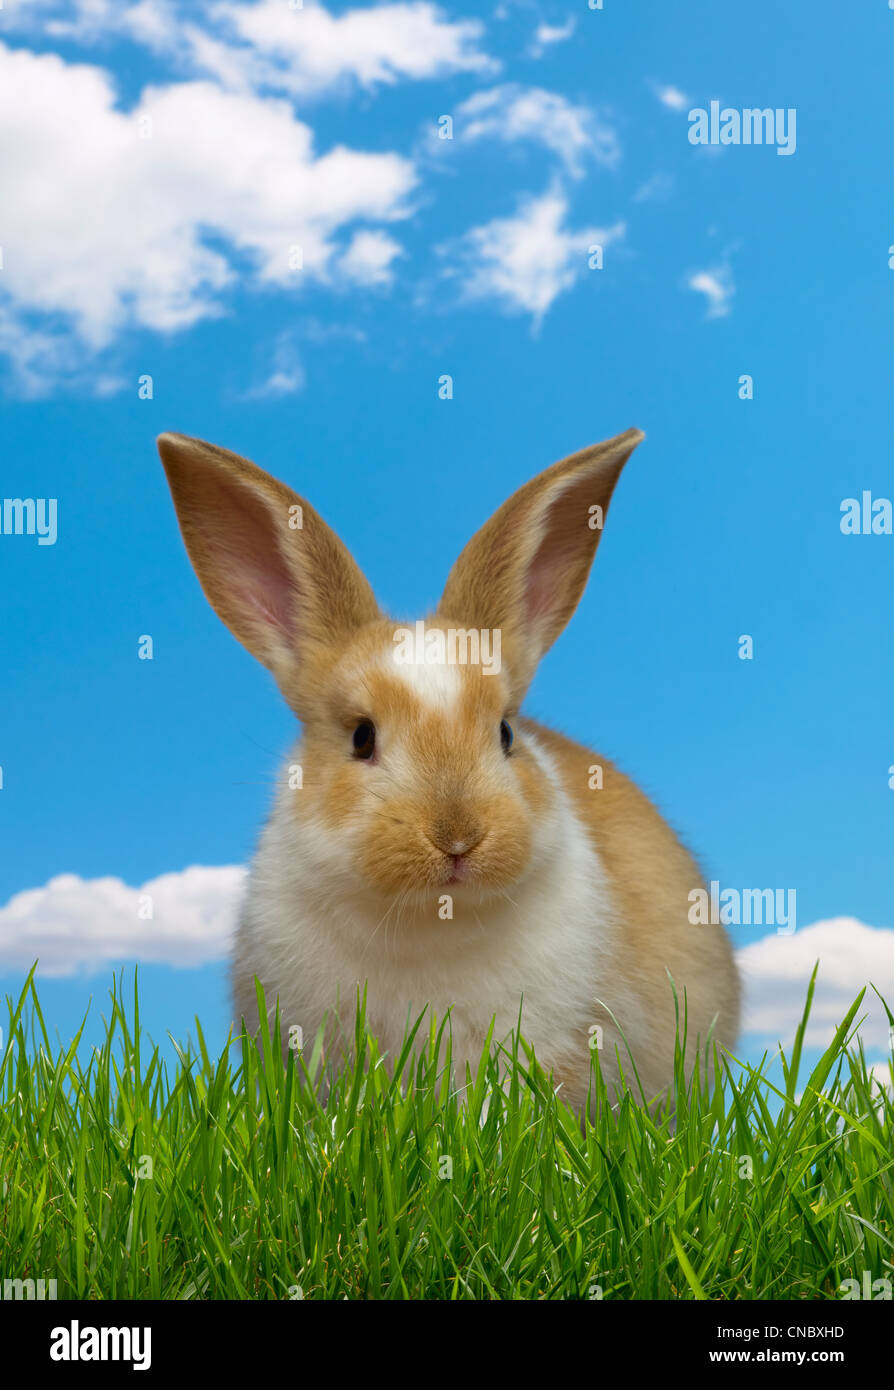 Bunny in the grass, sunny day Stock Photo